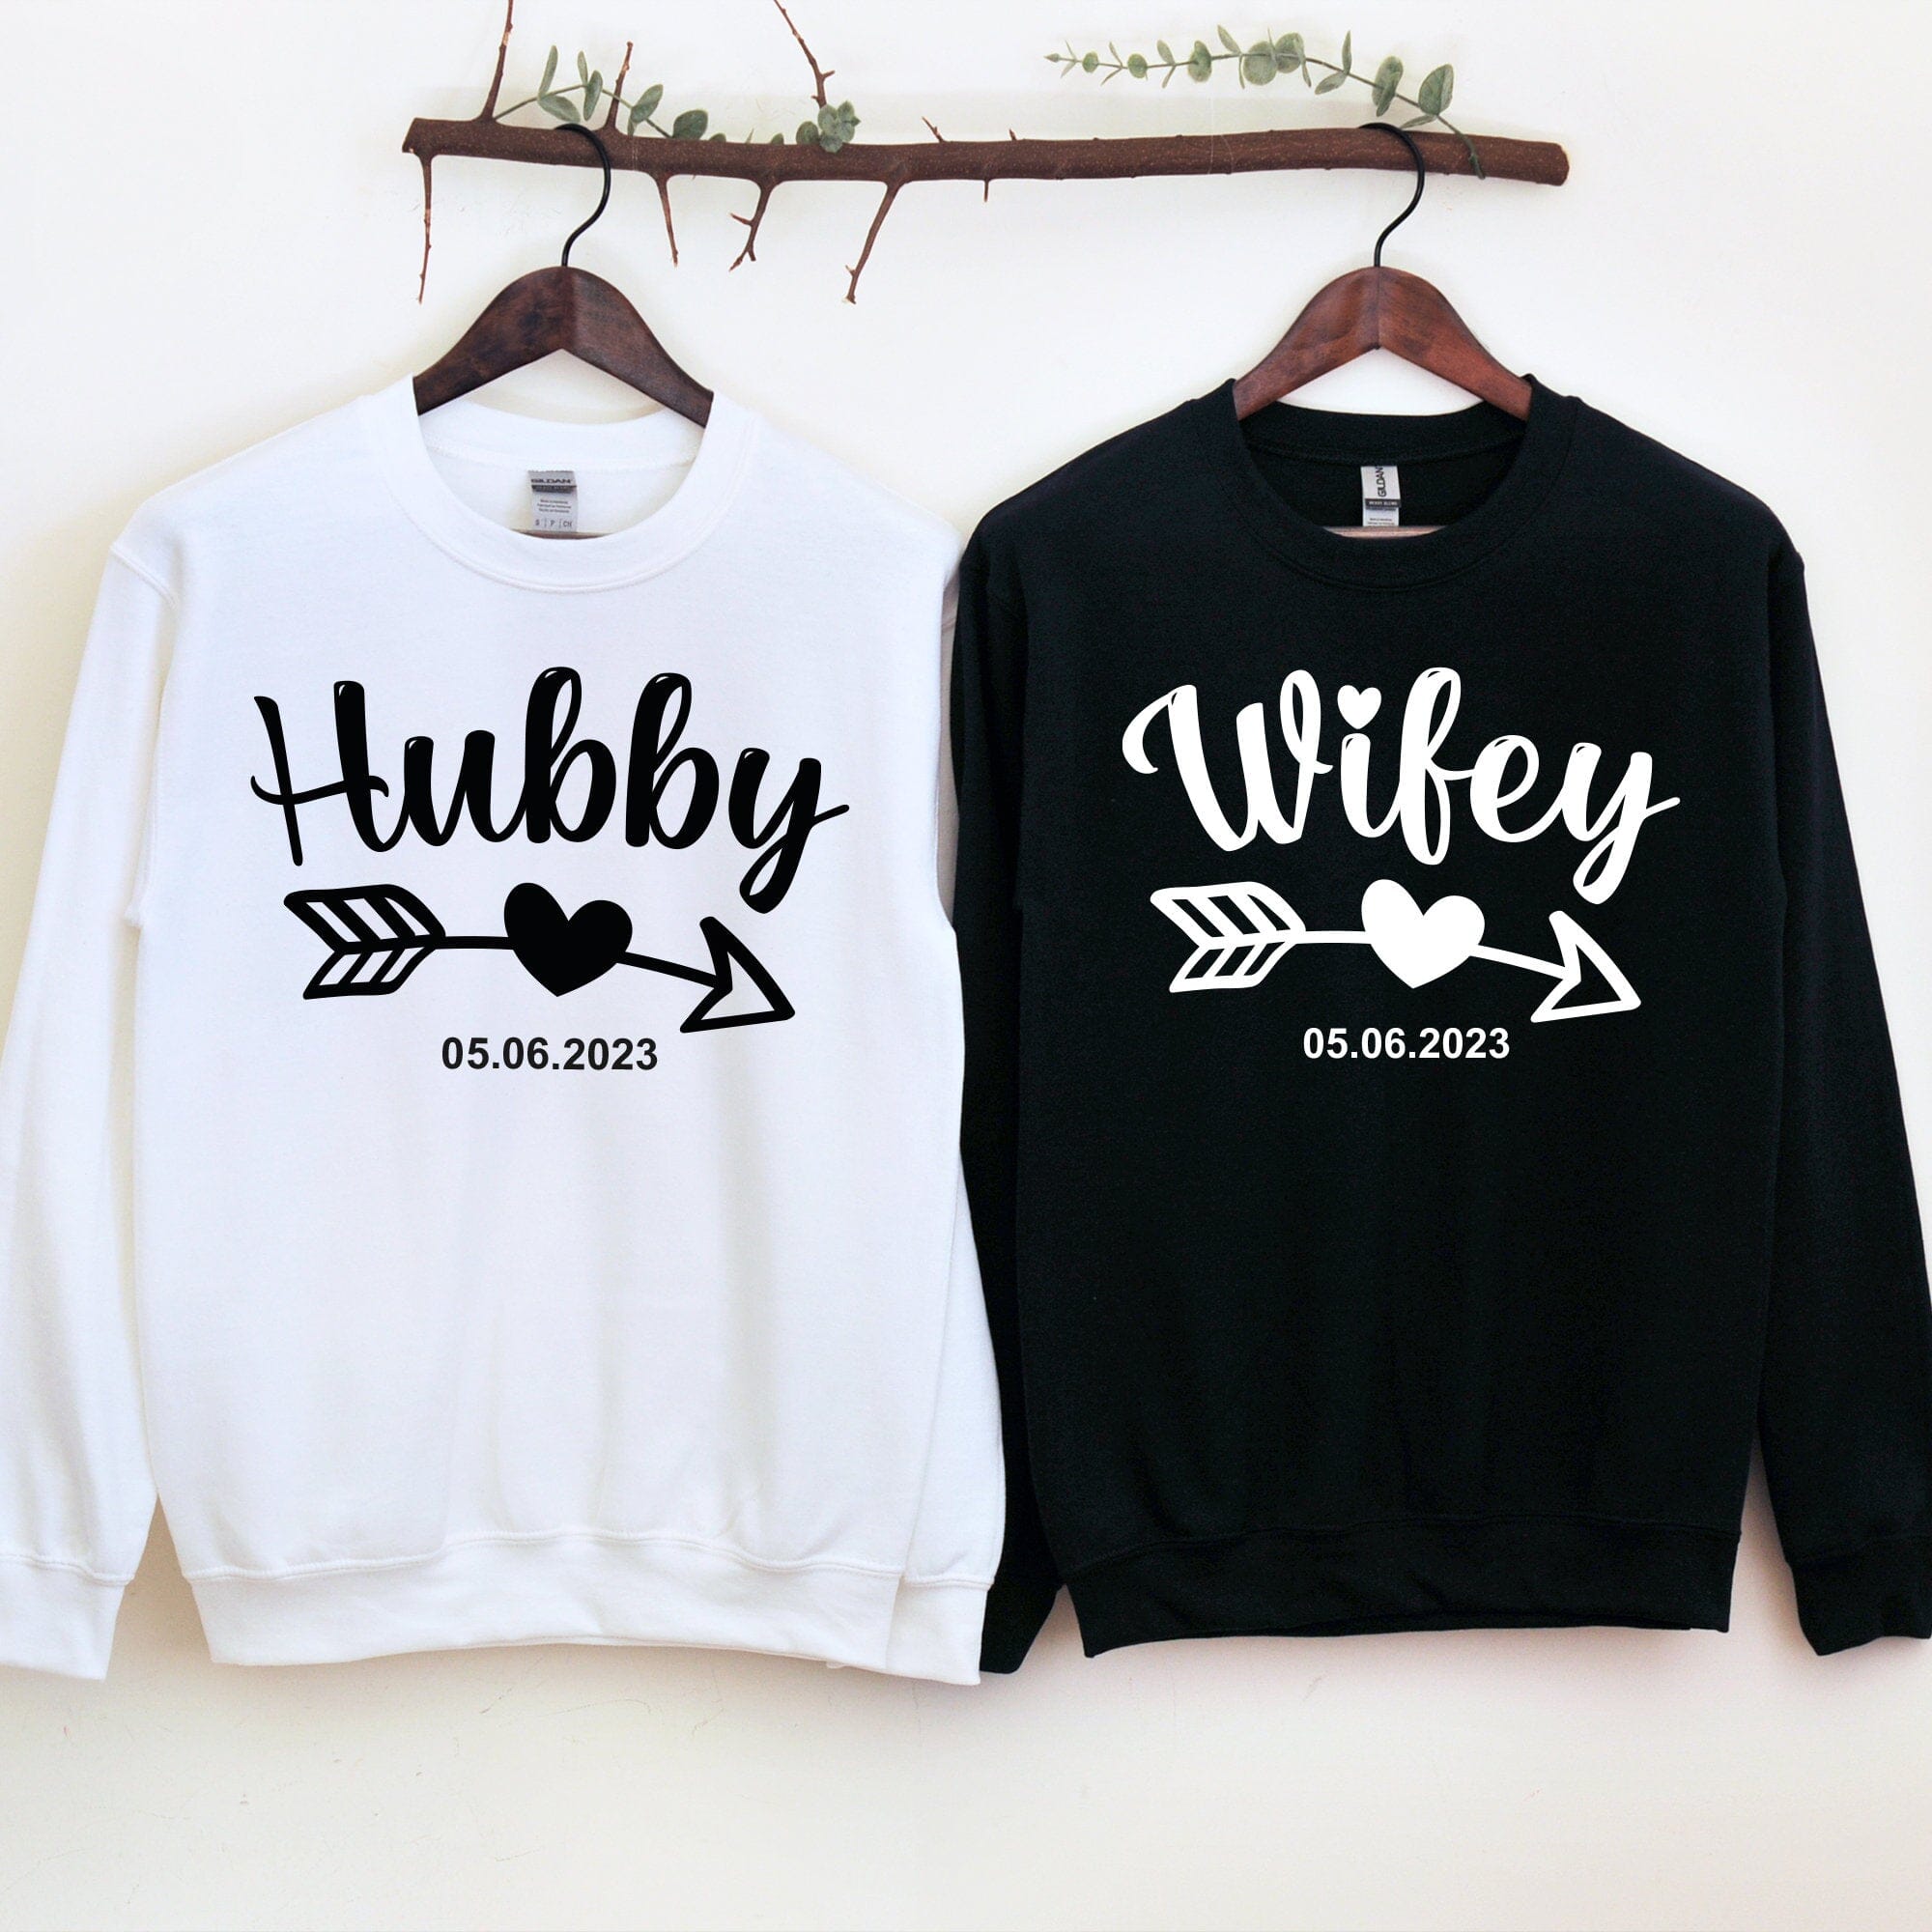 Personalised Wifey Hubby Jumper with Wedding Date, Bride Groom Mr Mrs Engagement Gift